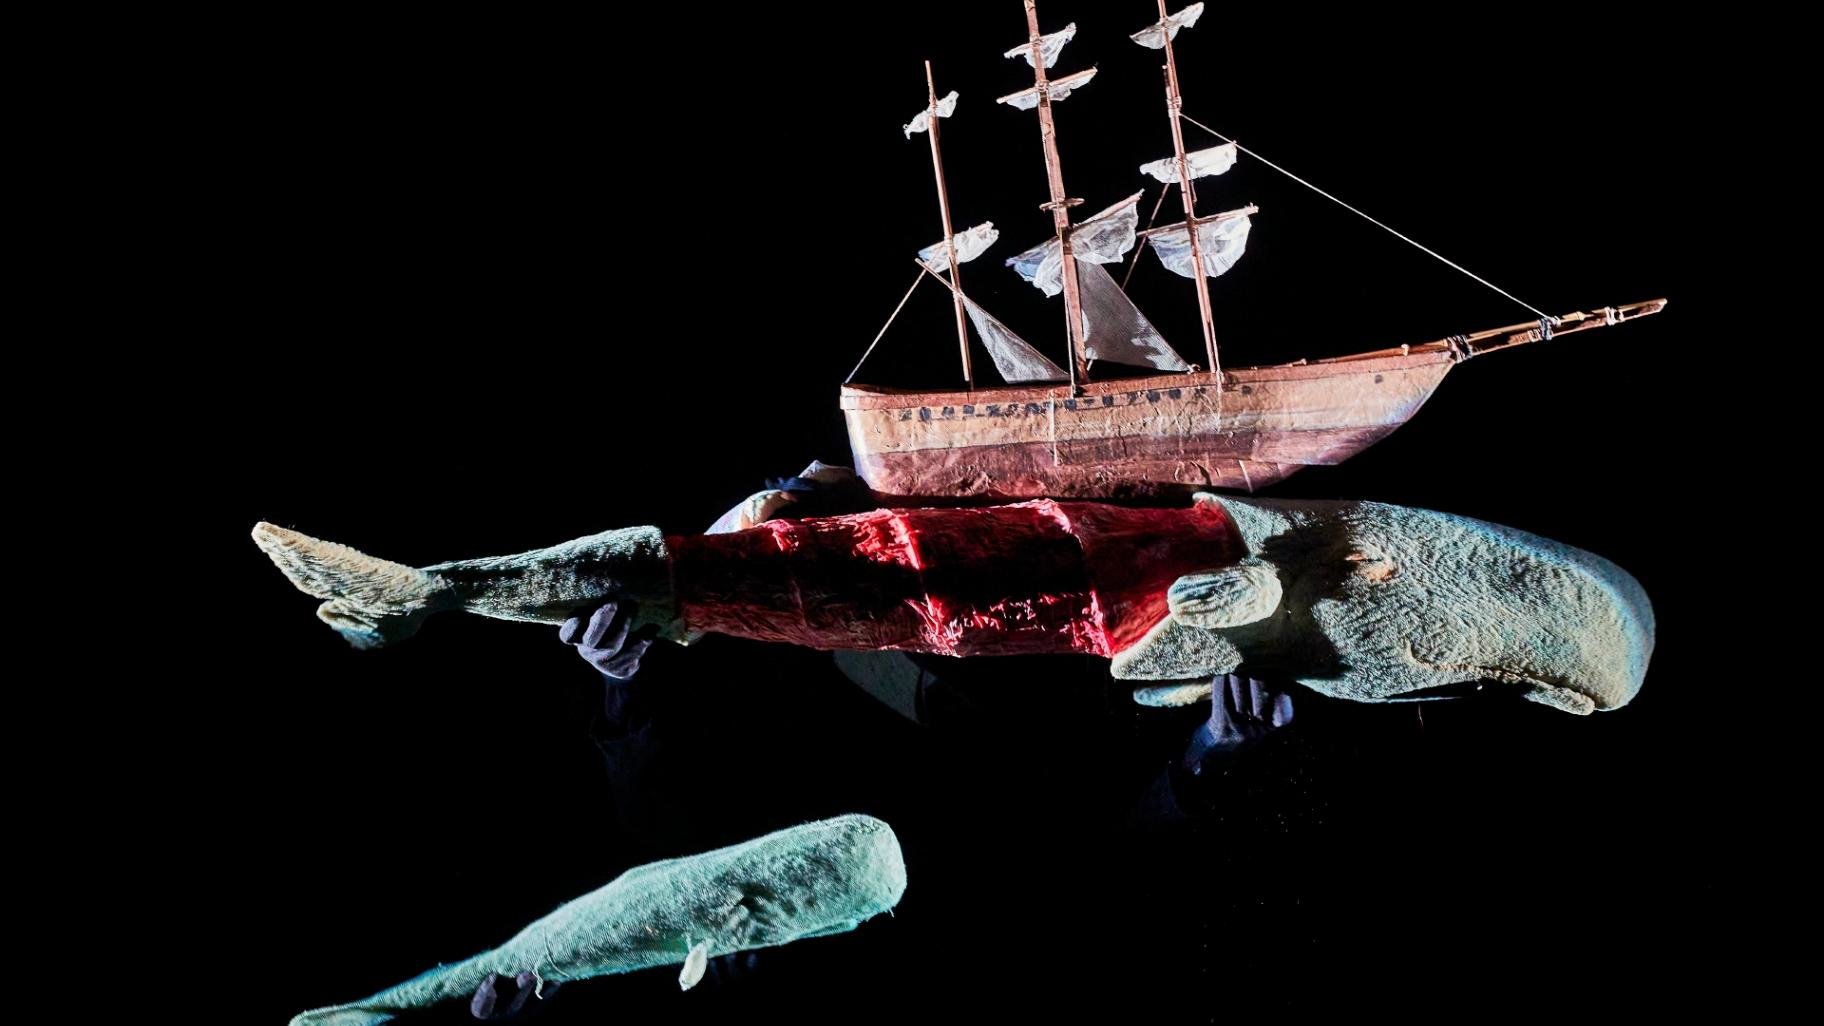 A take on “Moby Dick” opened the Chicago International Puppet Festival. (Credit: Christopher Raynaud deLage)